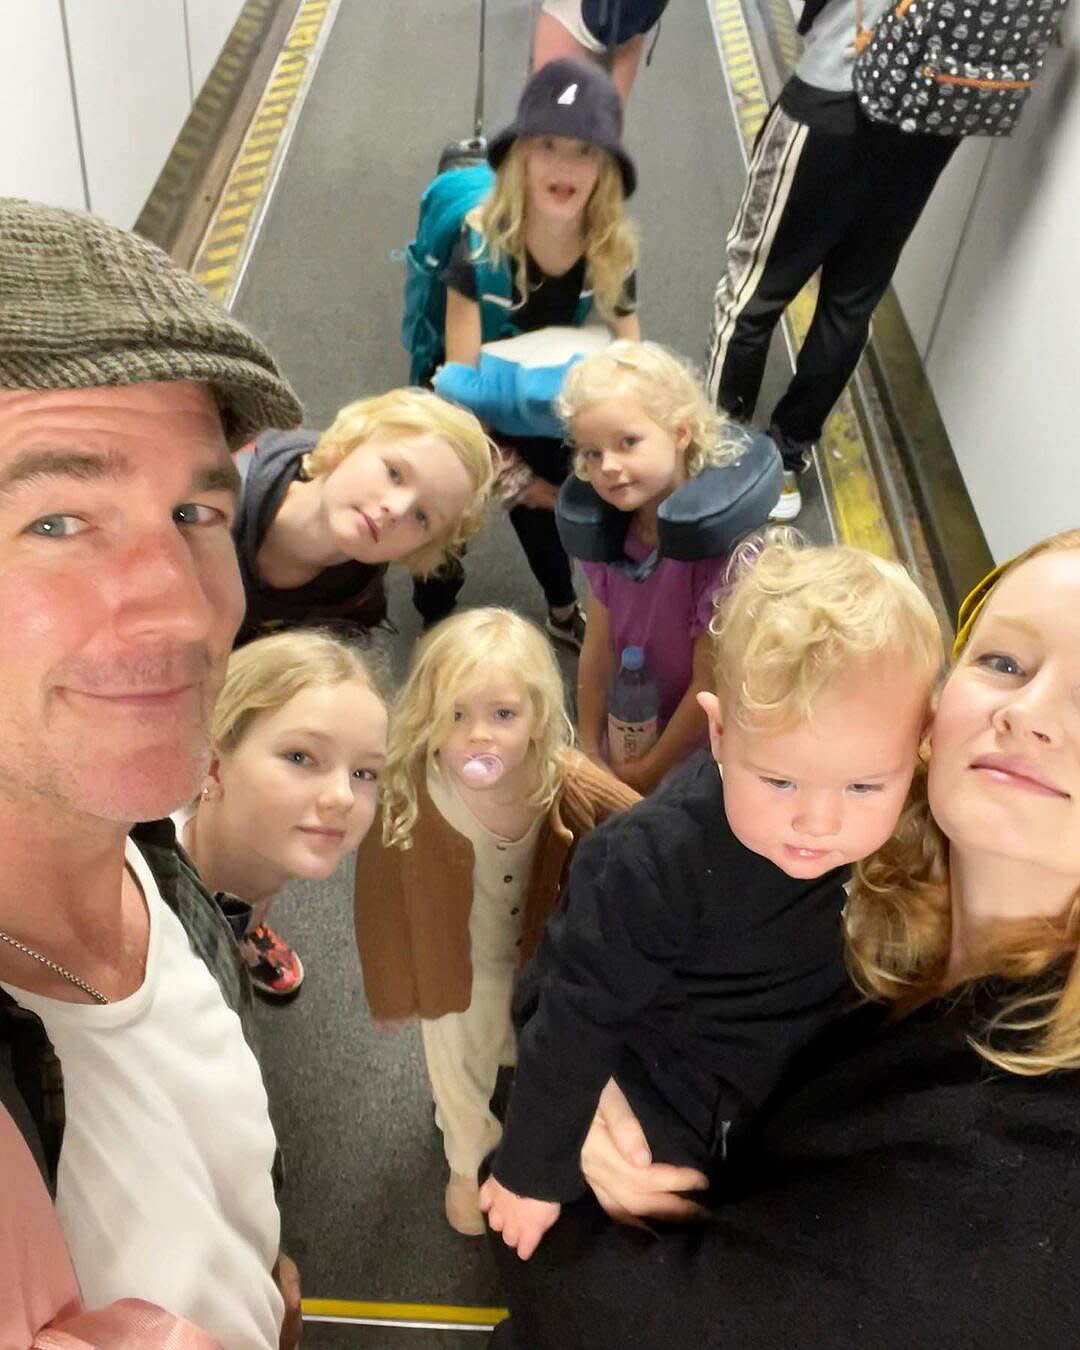 James Van Der Beek Reflects on Family Vacations as He Travels By Plane with All 7 Kids